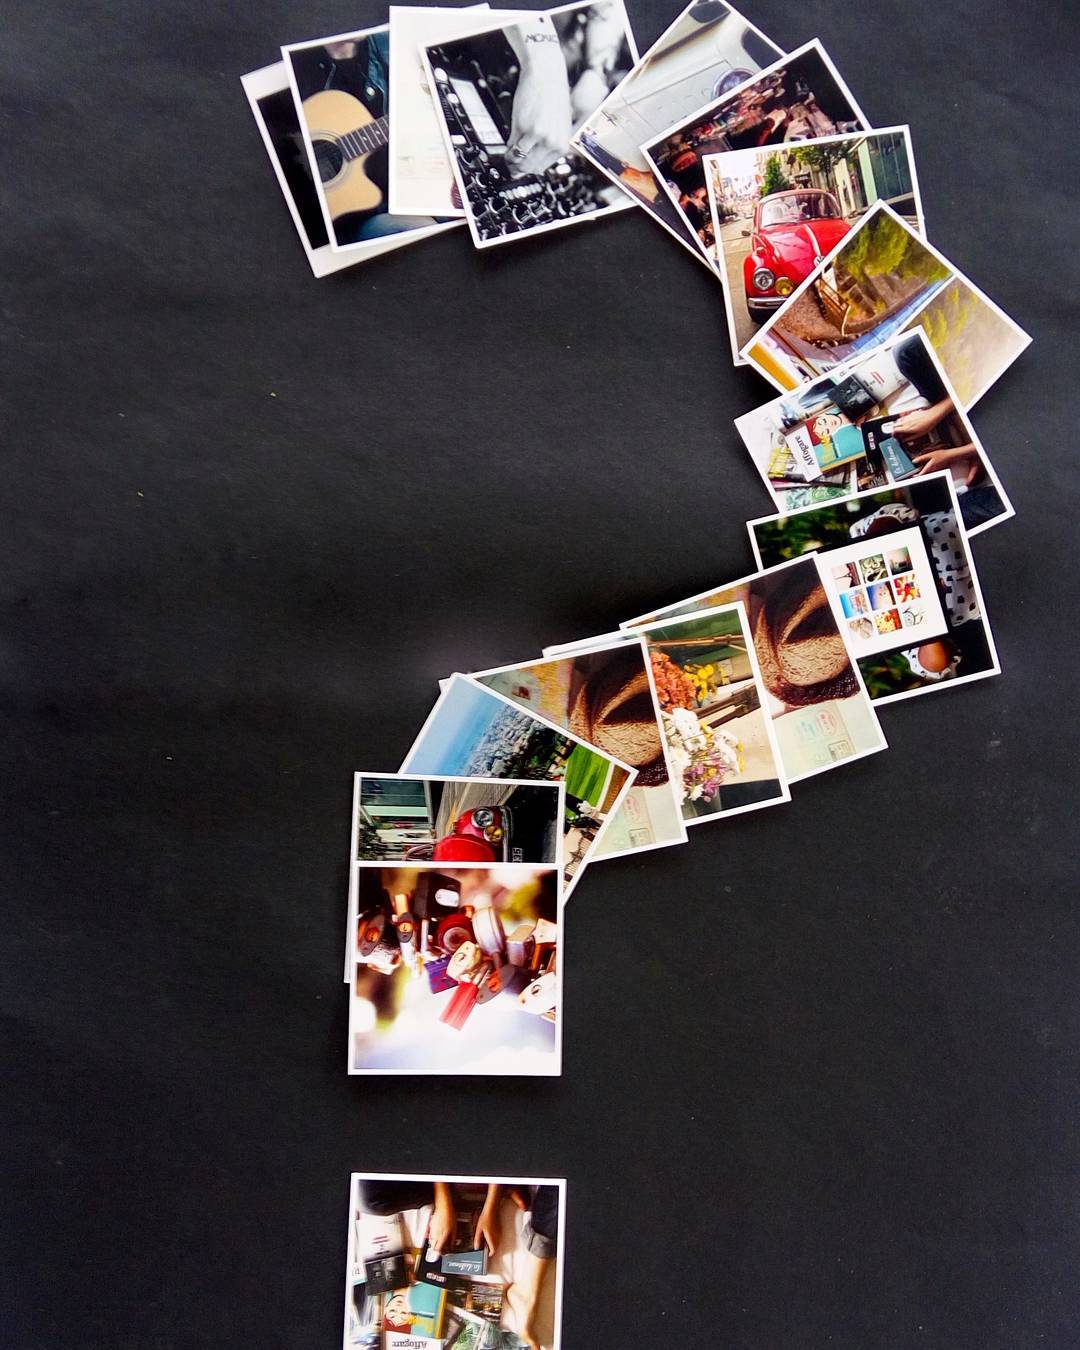 square instagram prints stacked on top of each other